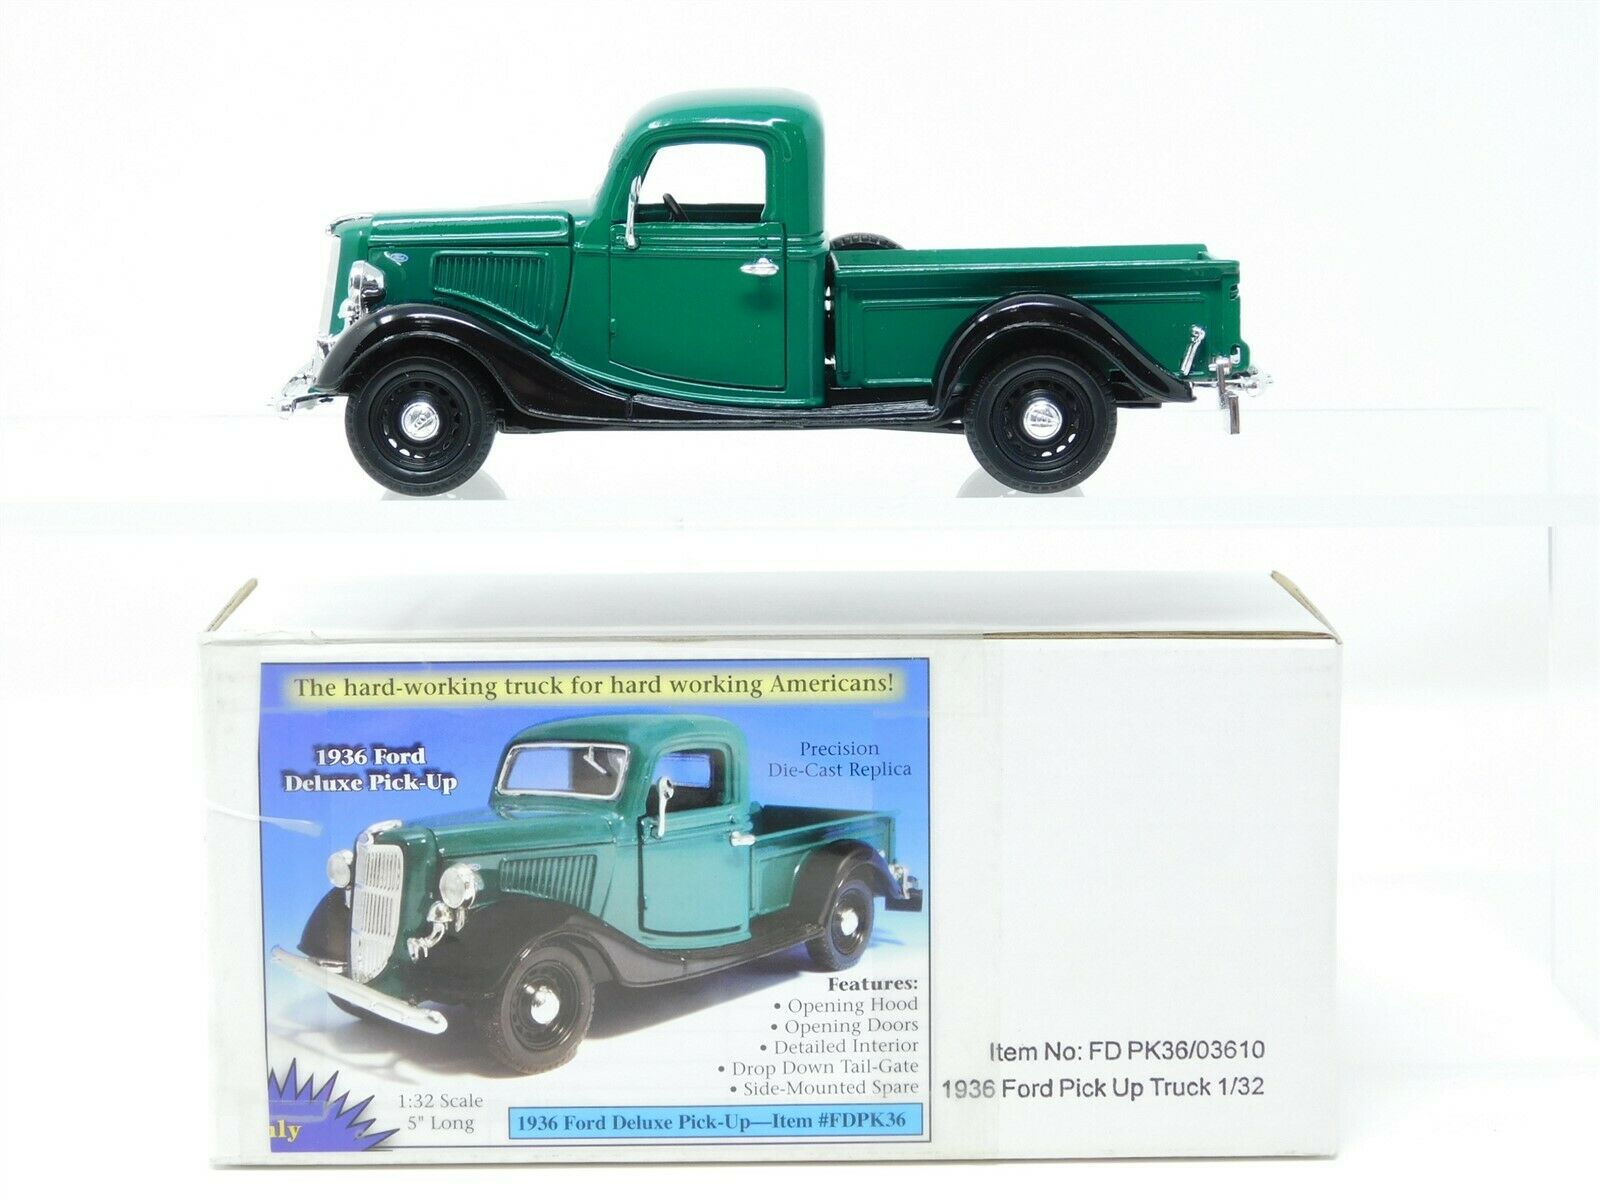 1:32 Scale National Motor Museum Fd Pk36/03610 Die-cast 1936 Ford Deluxe Pickup